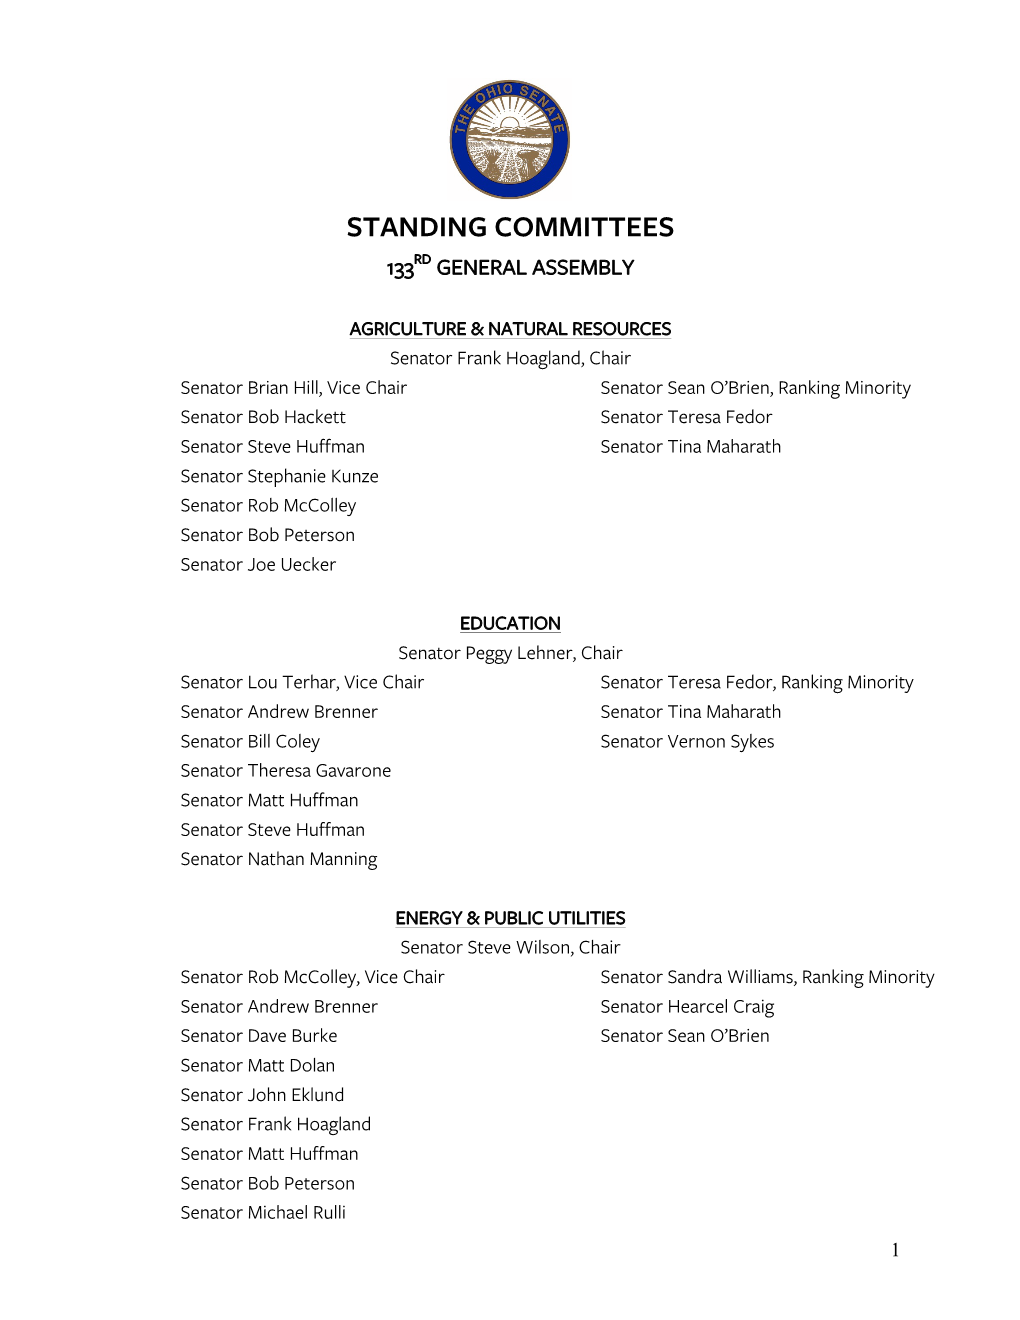 Standing Committees 133Rd General Assembly